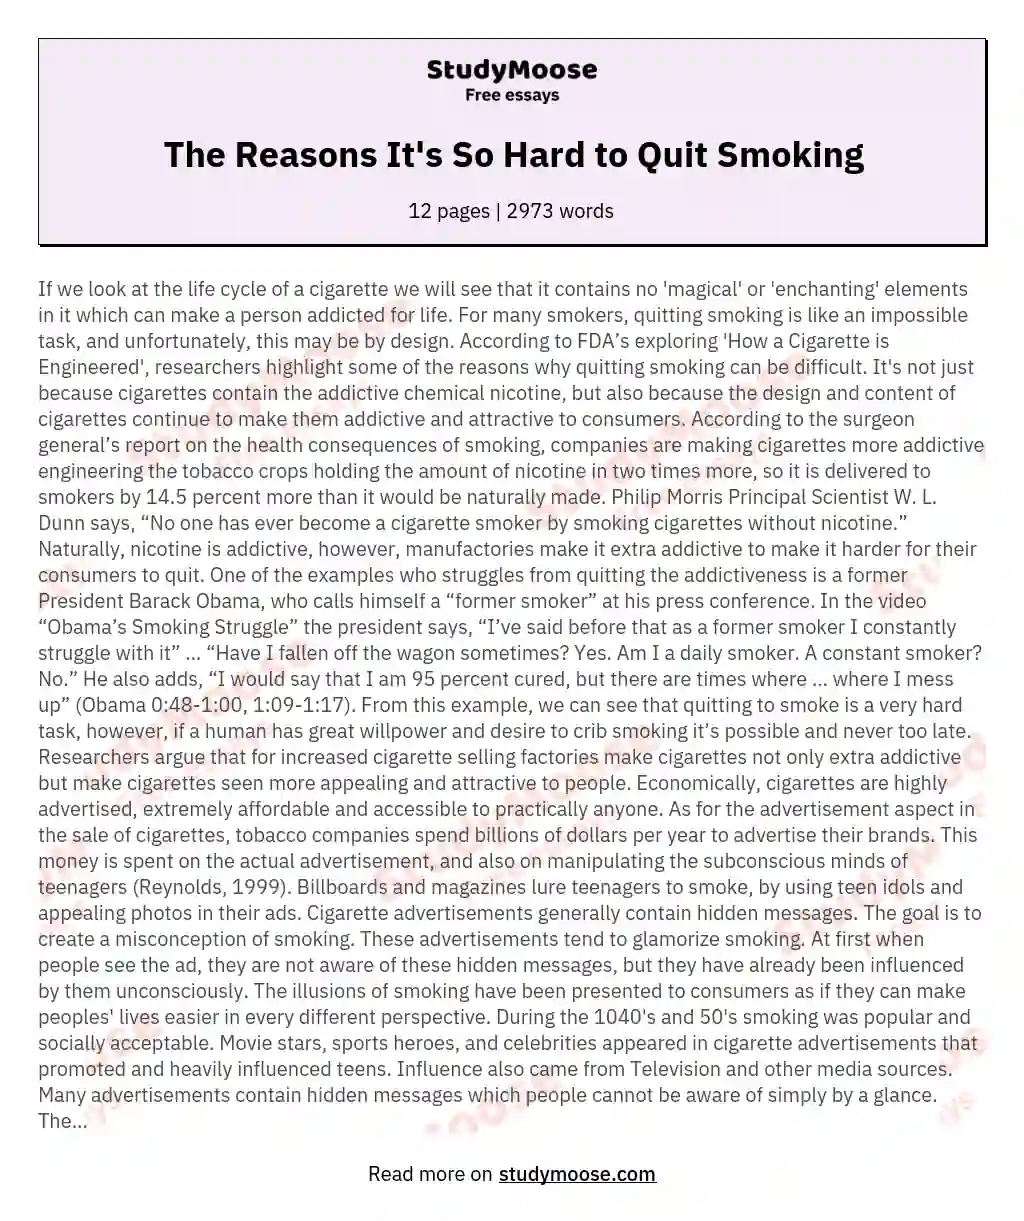 The Reasons It's So Hard to Quit Smoking essay